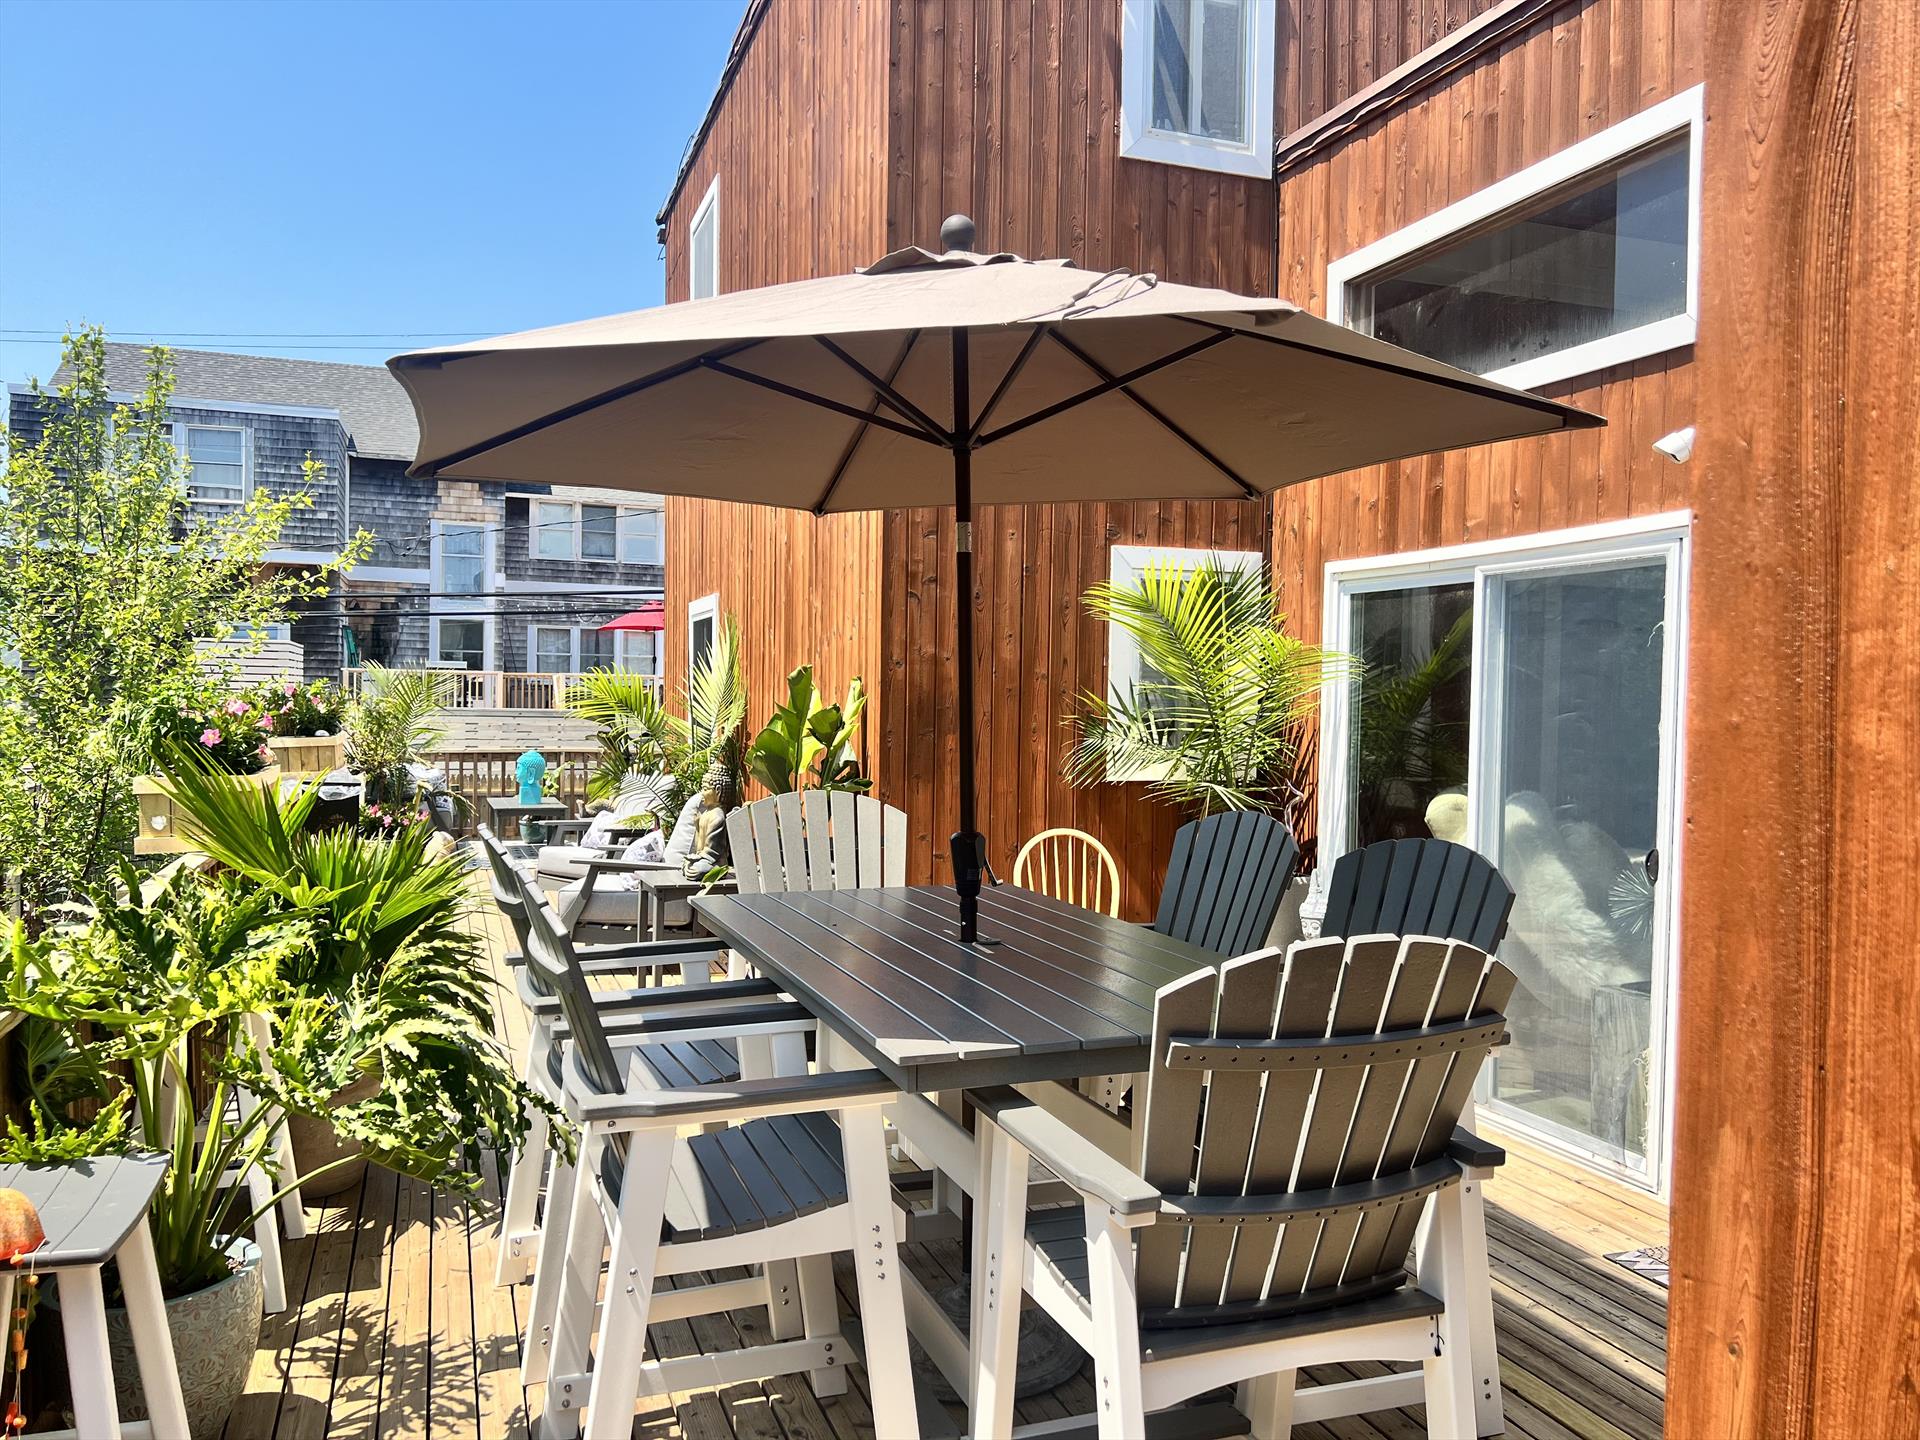 Don't miss out on this beach house! 4 bedrooms, 2 bathrooms. Plenty of beds and plenty of deck space. Outdoor shower, beach chairs, wagons, this house as it all for you to enjoy our stay on Fire Island. 
